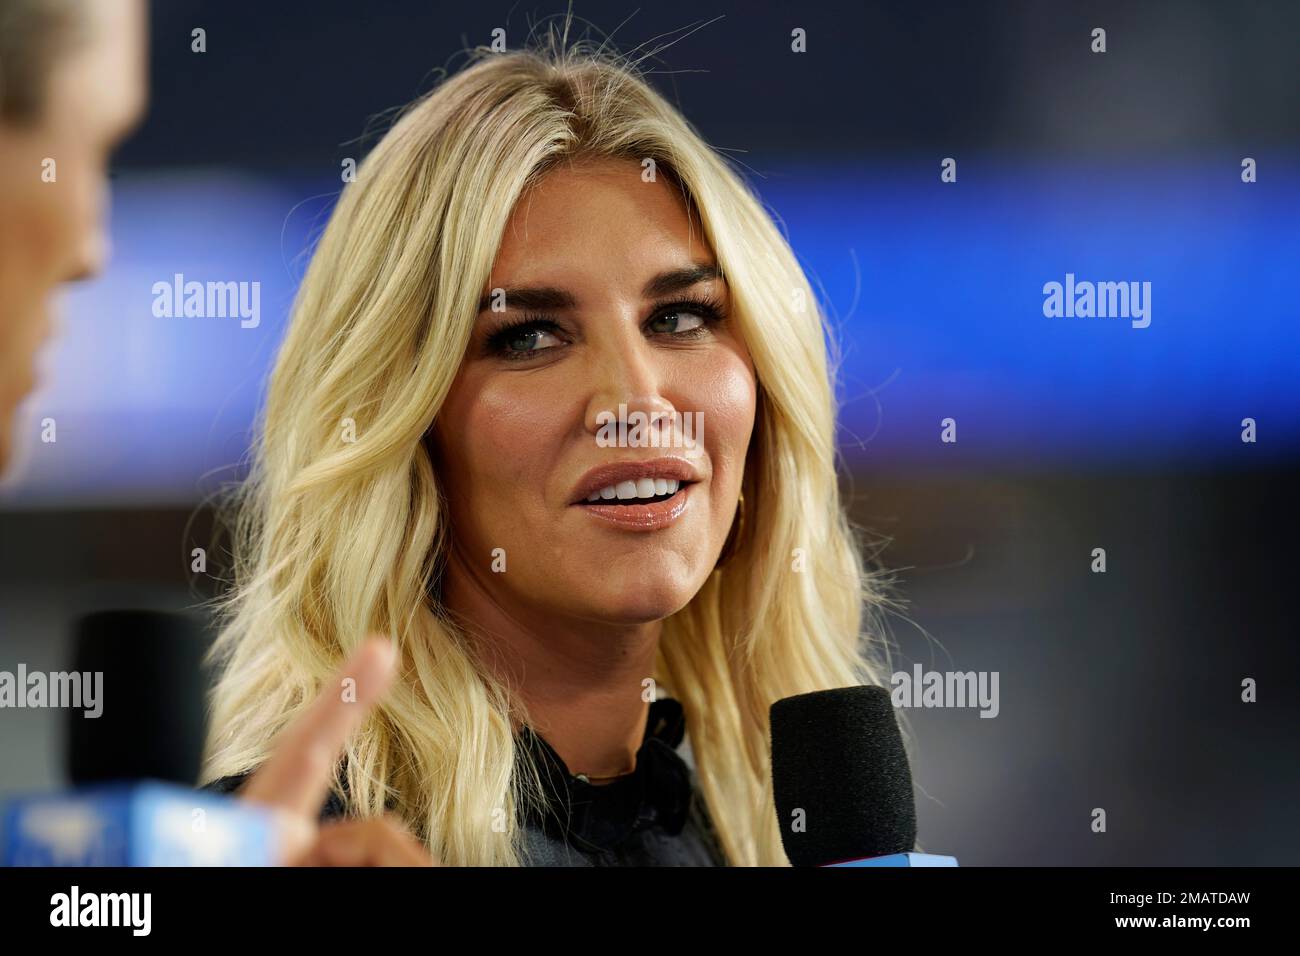 Reporter Charissa Thompson talks in the Amazon Prime Video broadcast booth before a preseason NFL football game between the Los Angeles Rams and the Houston Texans Friday, Aug